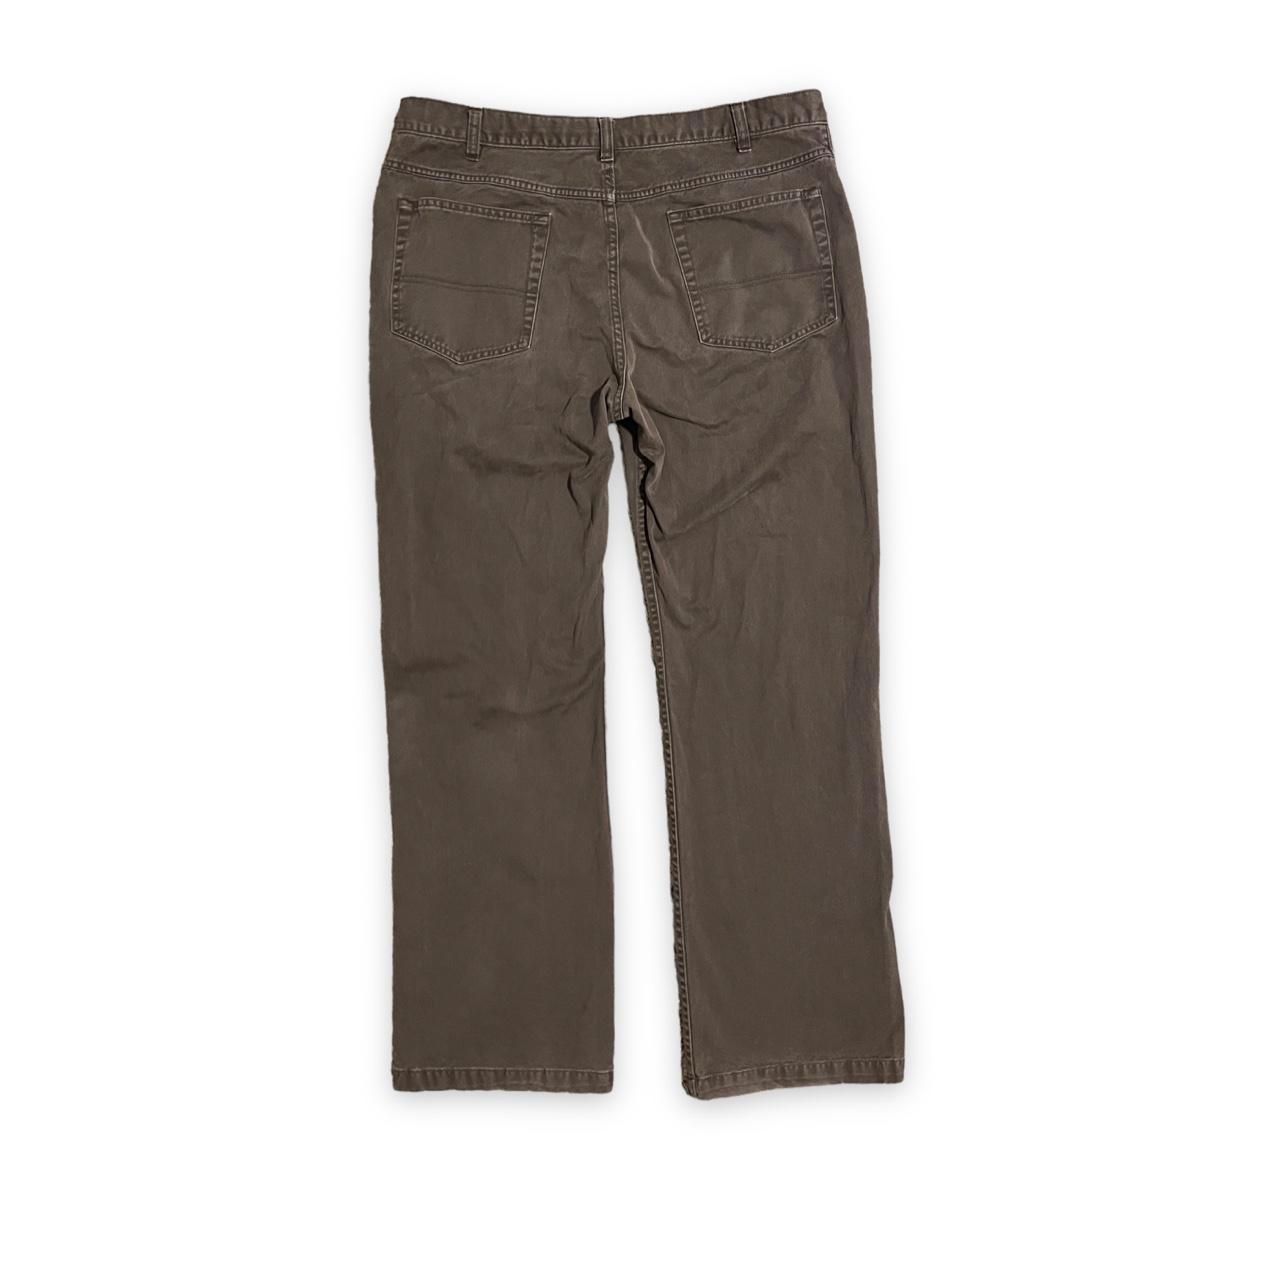 Kenneth Cole Men's Brown and Black Jeans (3)